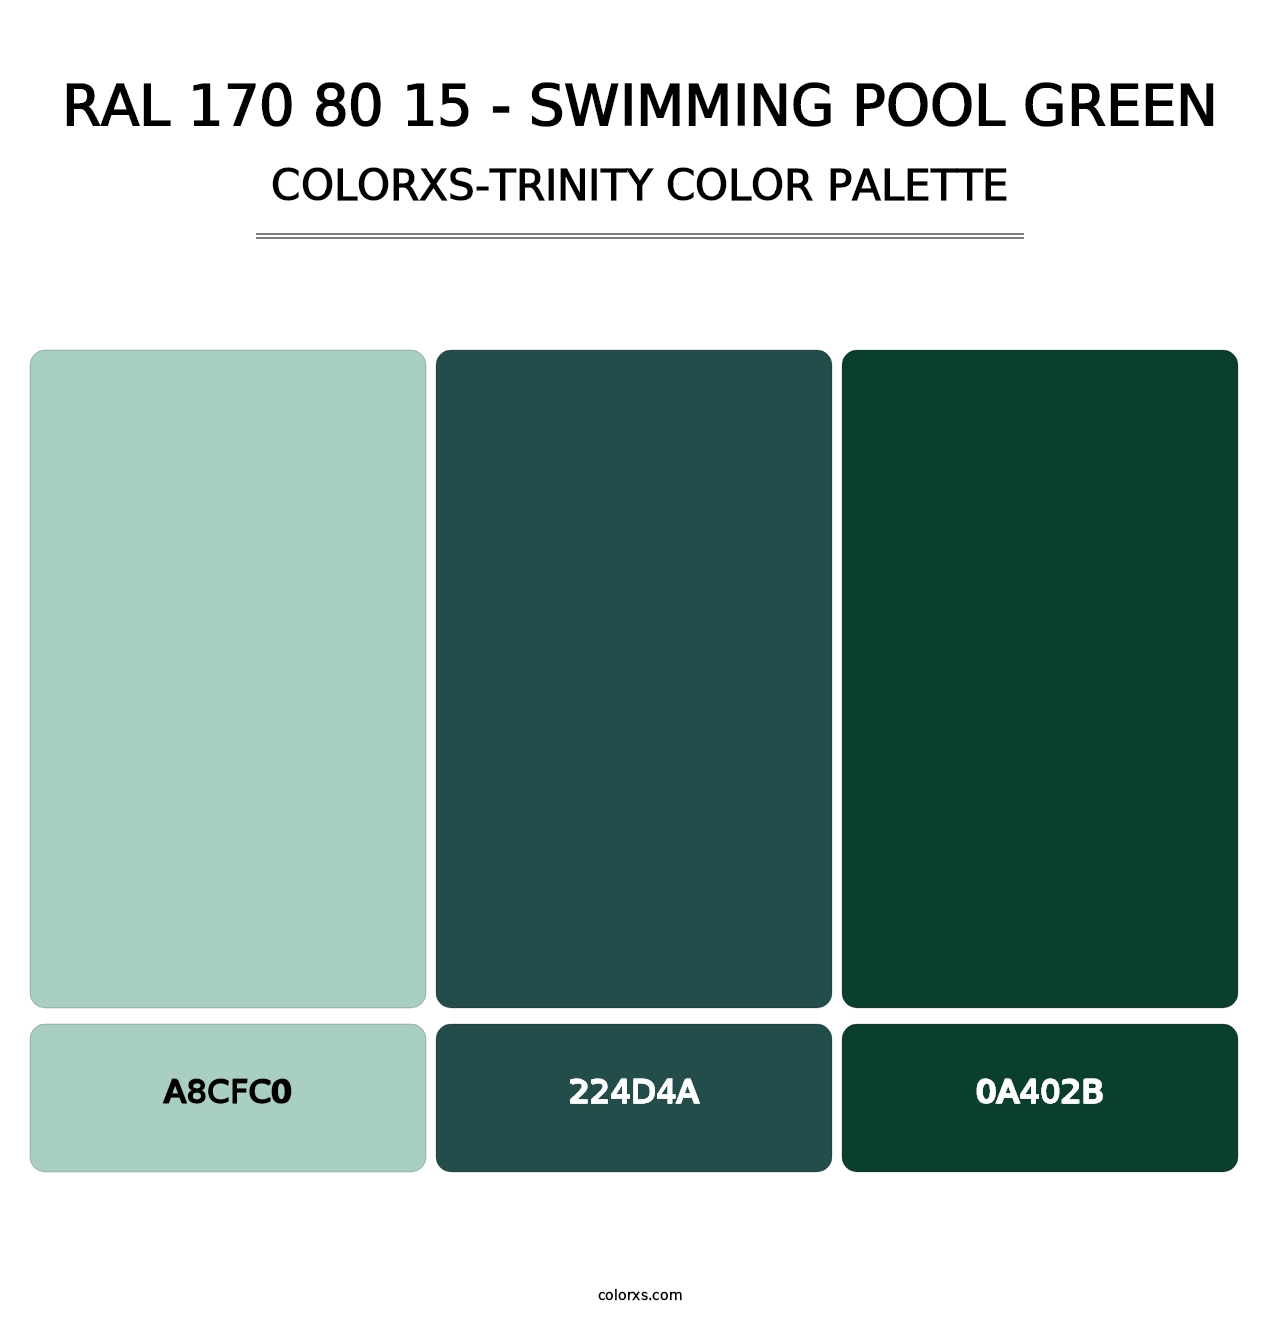 RAL 170 80 15 - Swimming Pool Green - Colorxs Trinity Palette